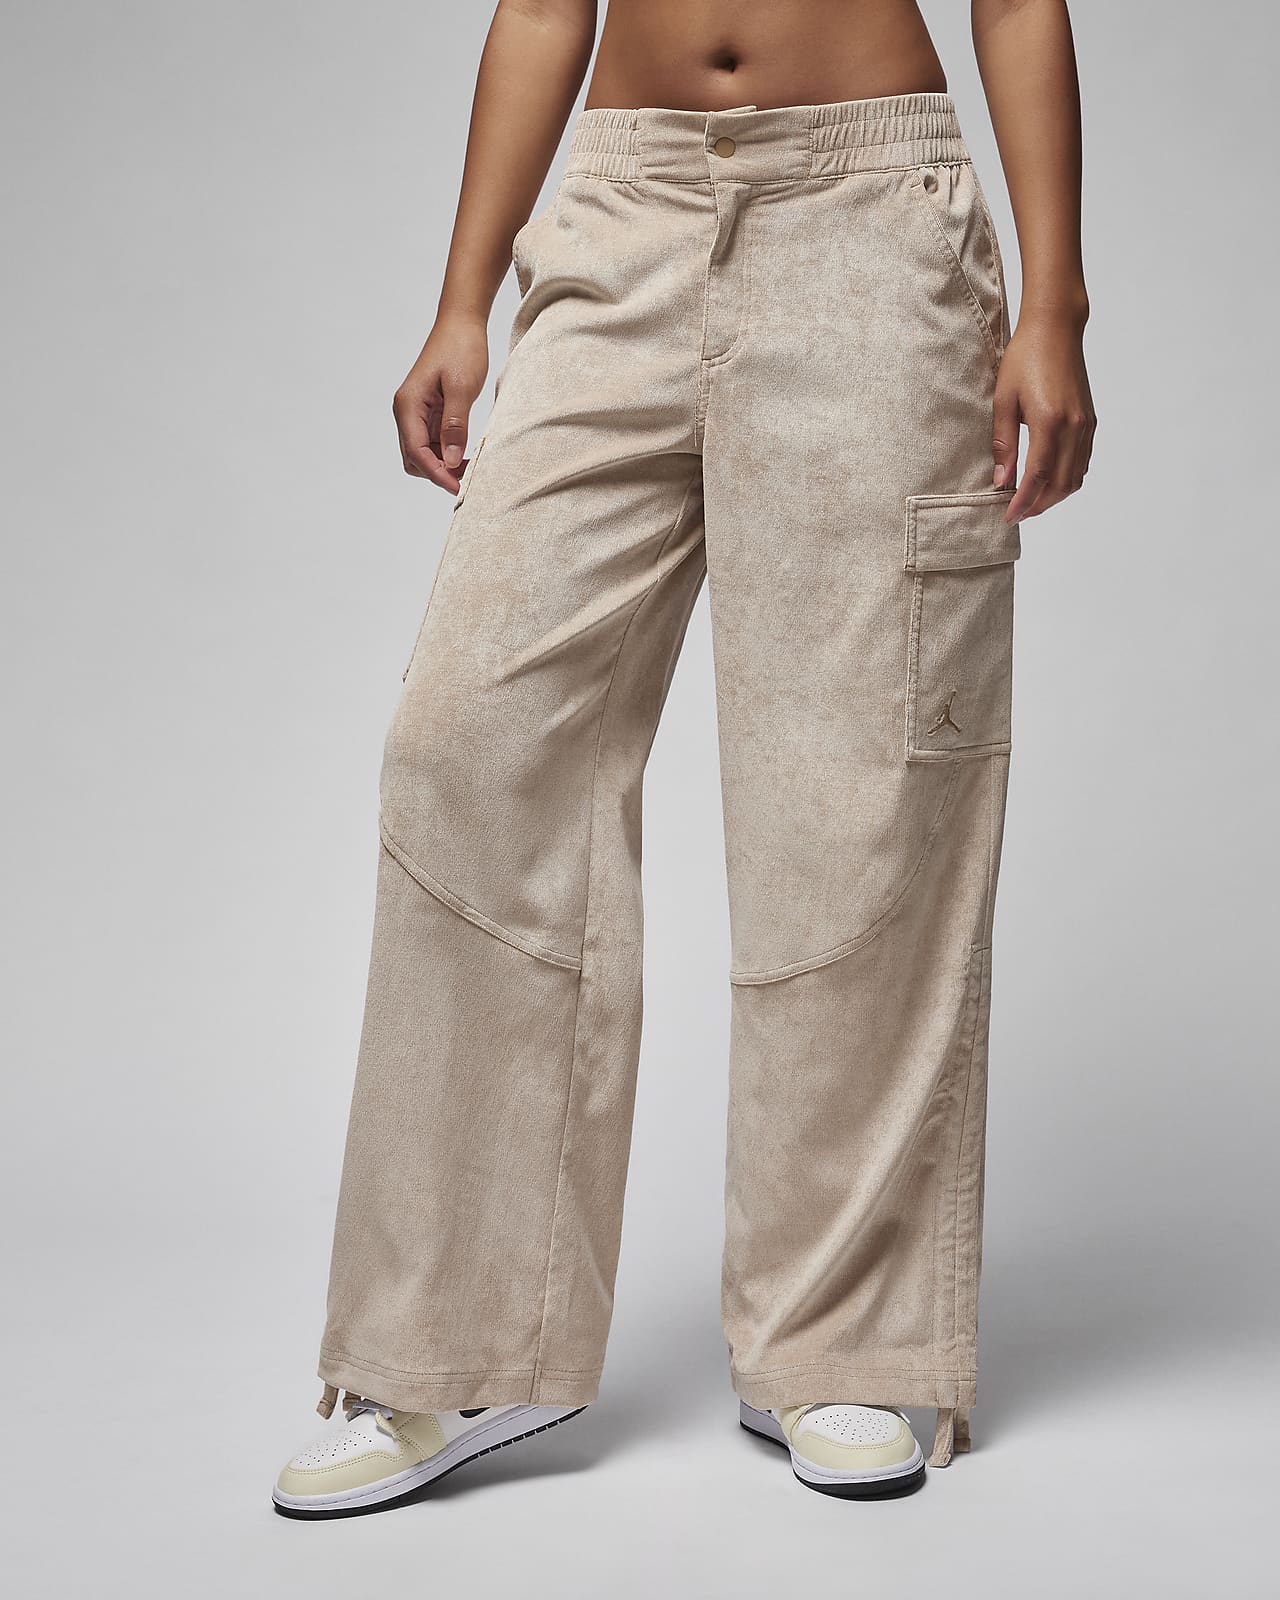 Heartbreak fit and flare cord trousers in chocolate brown | ASOS